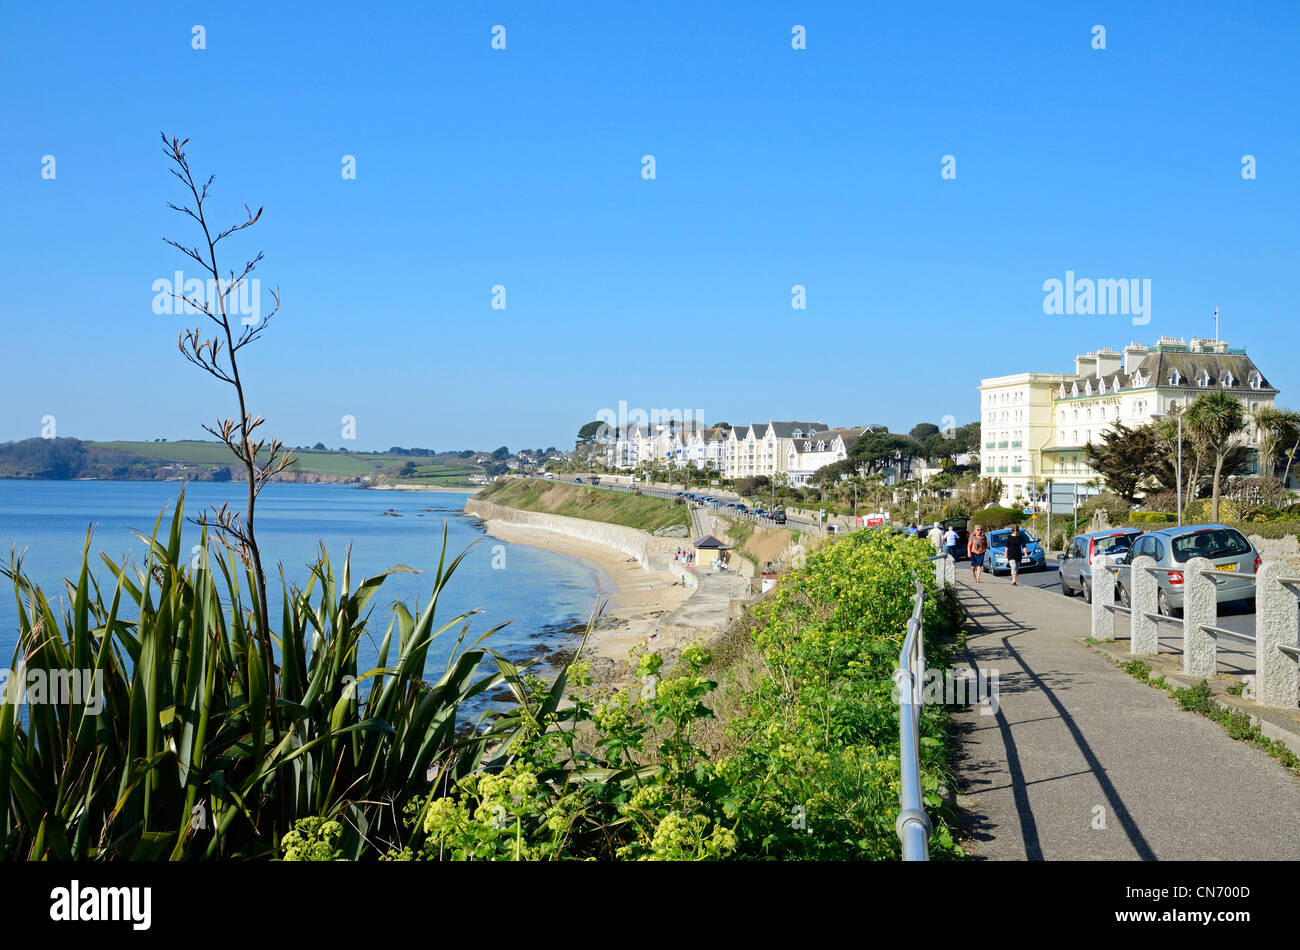 Castle beach on Cliff road in Falmouth, Cornwall, uk Stock Photo